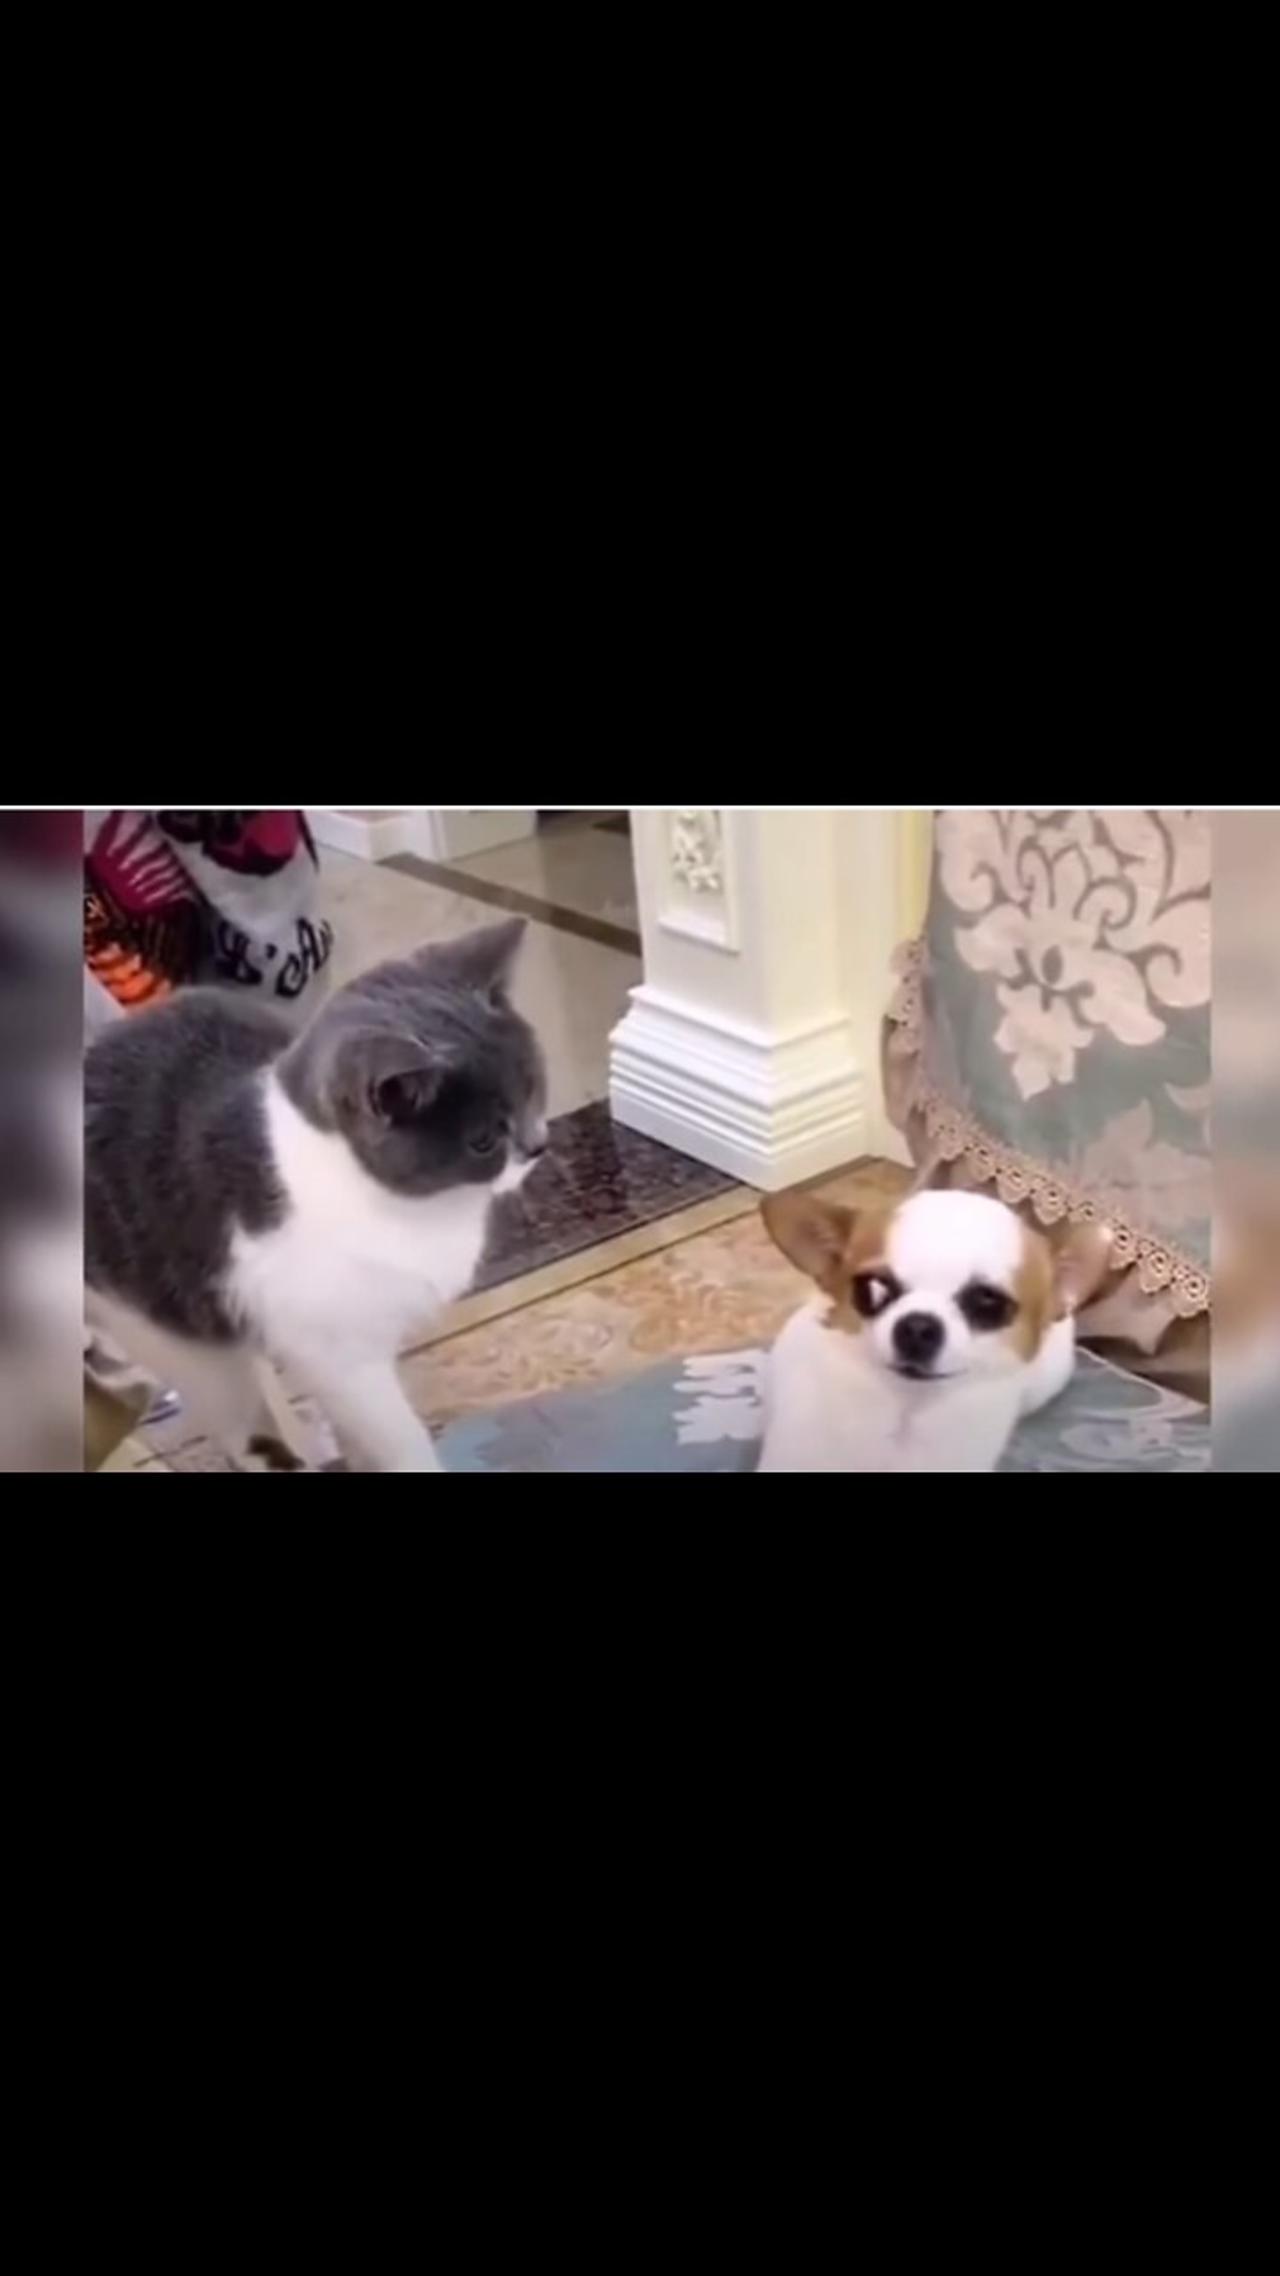 Very Funny Videos 😀 Cute Dog 🐕 and So Funny 🐈 Cat